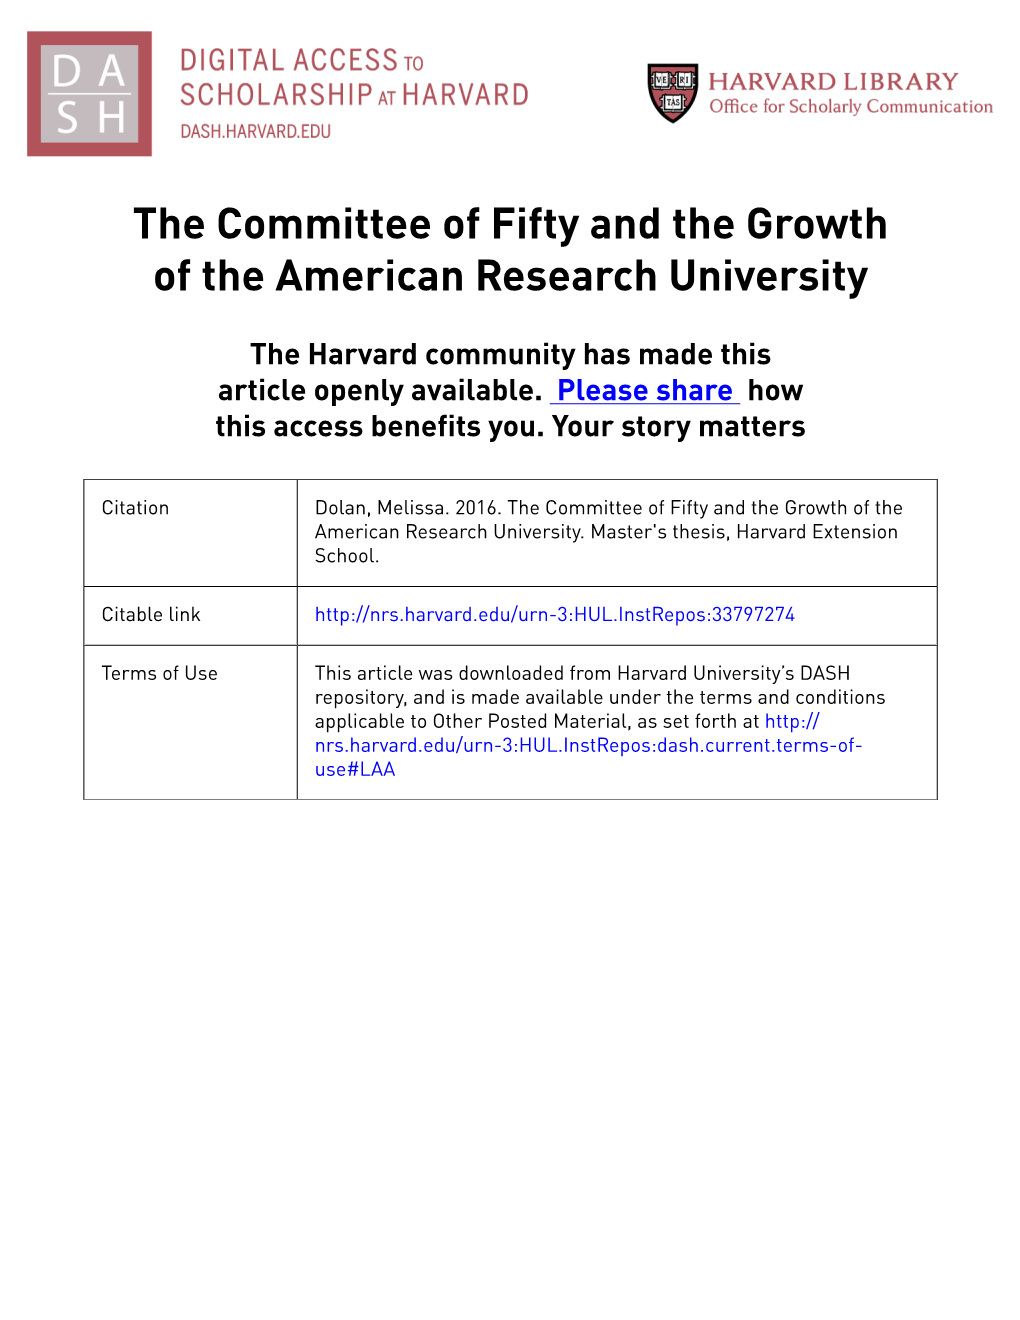 The Committee of Fifty and the Growth of the American Research University